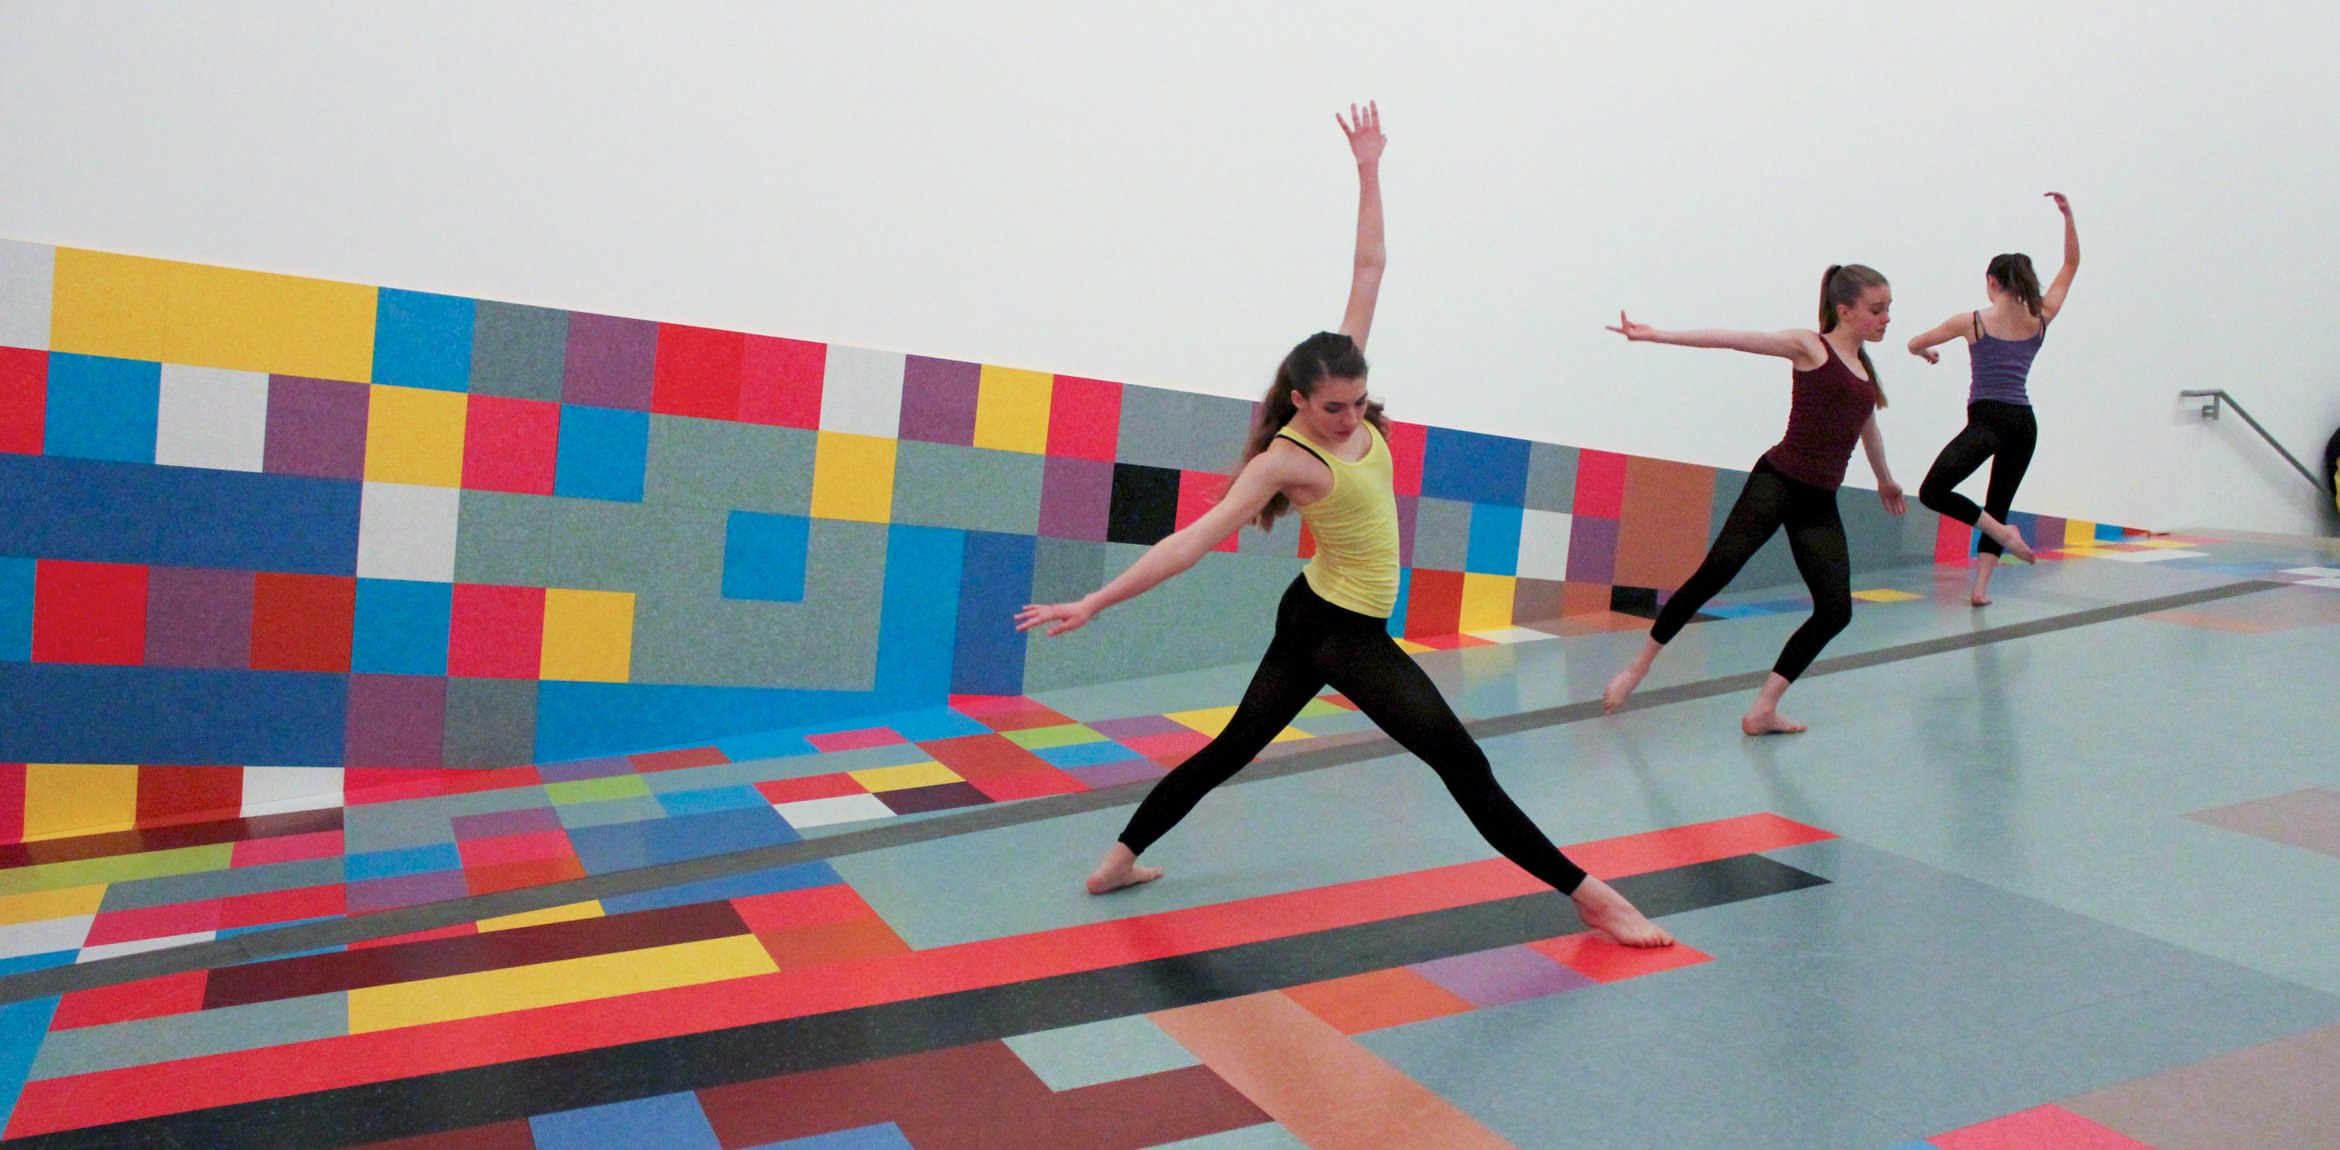 COCA dancers perform with David Scanavino's "Candy Crush" installation.